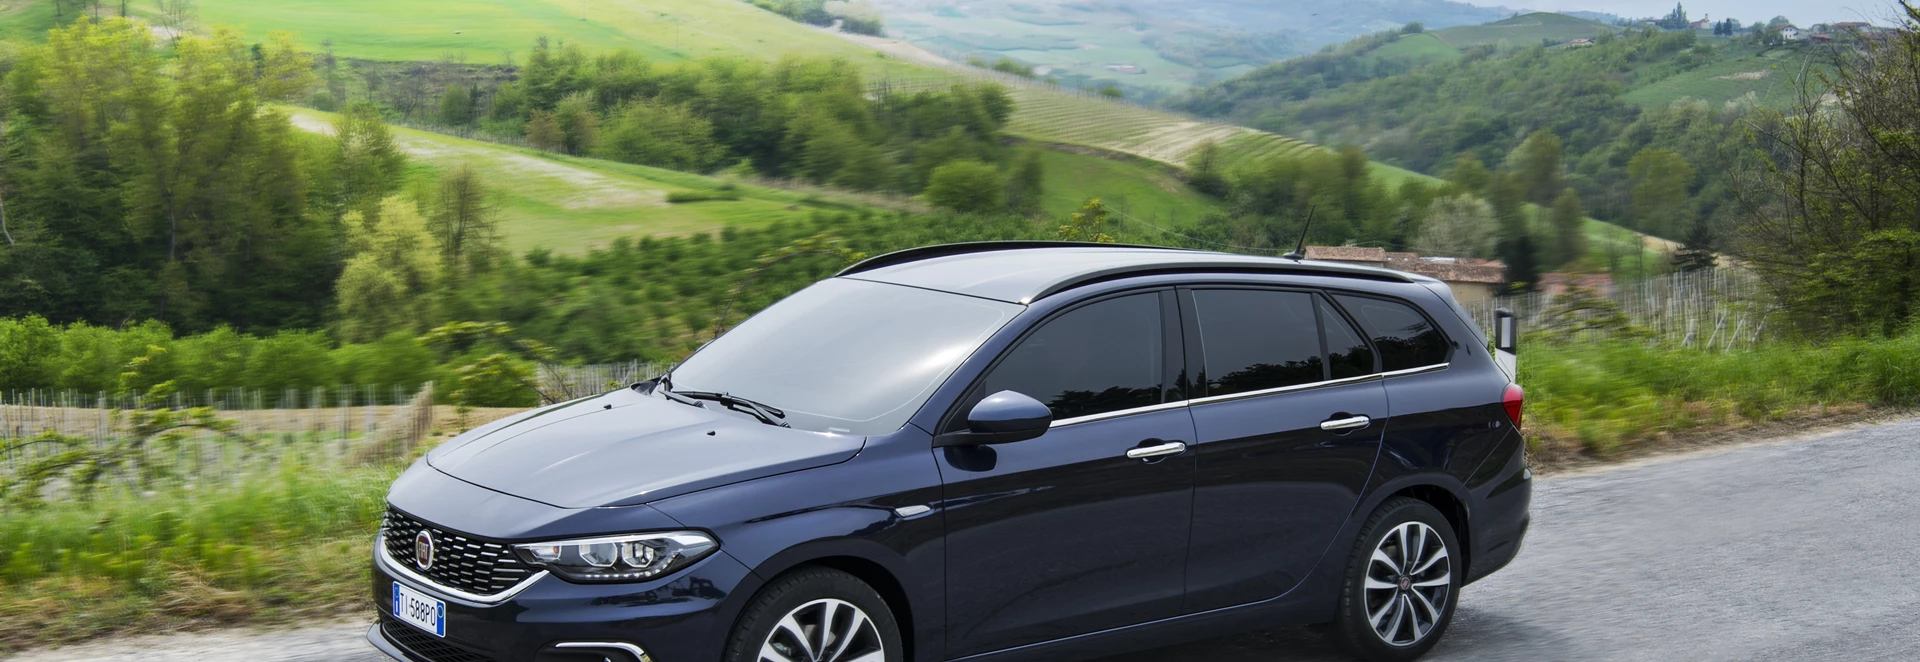 Fiat Tipo Lounge 1.6 MultiJet Station Wagon Estate 2017 Review 